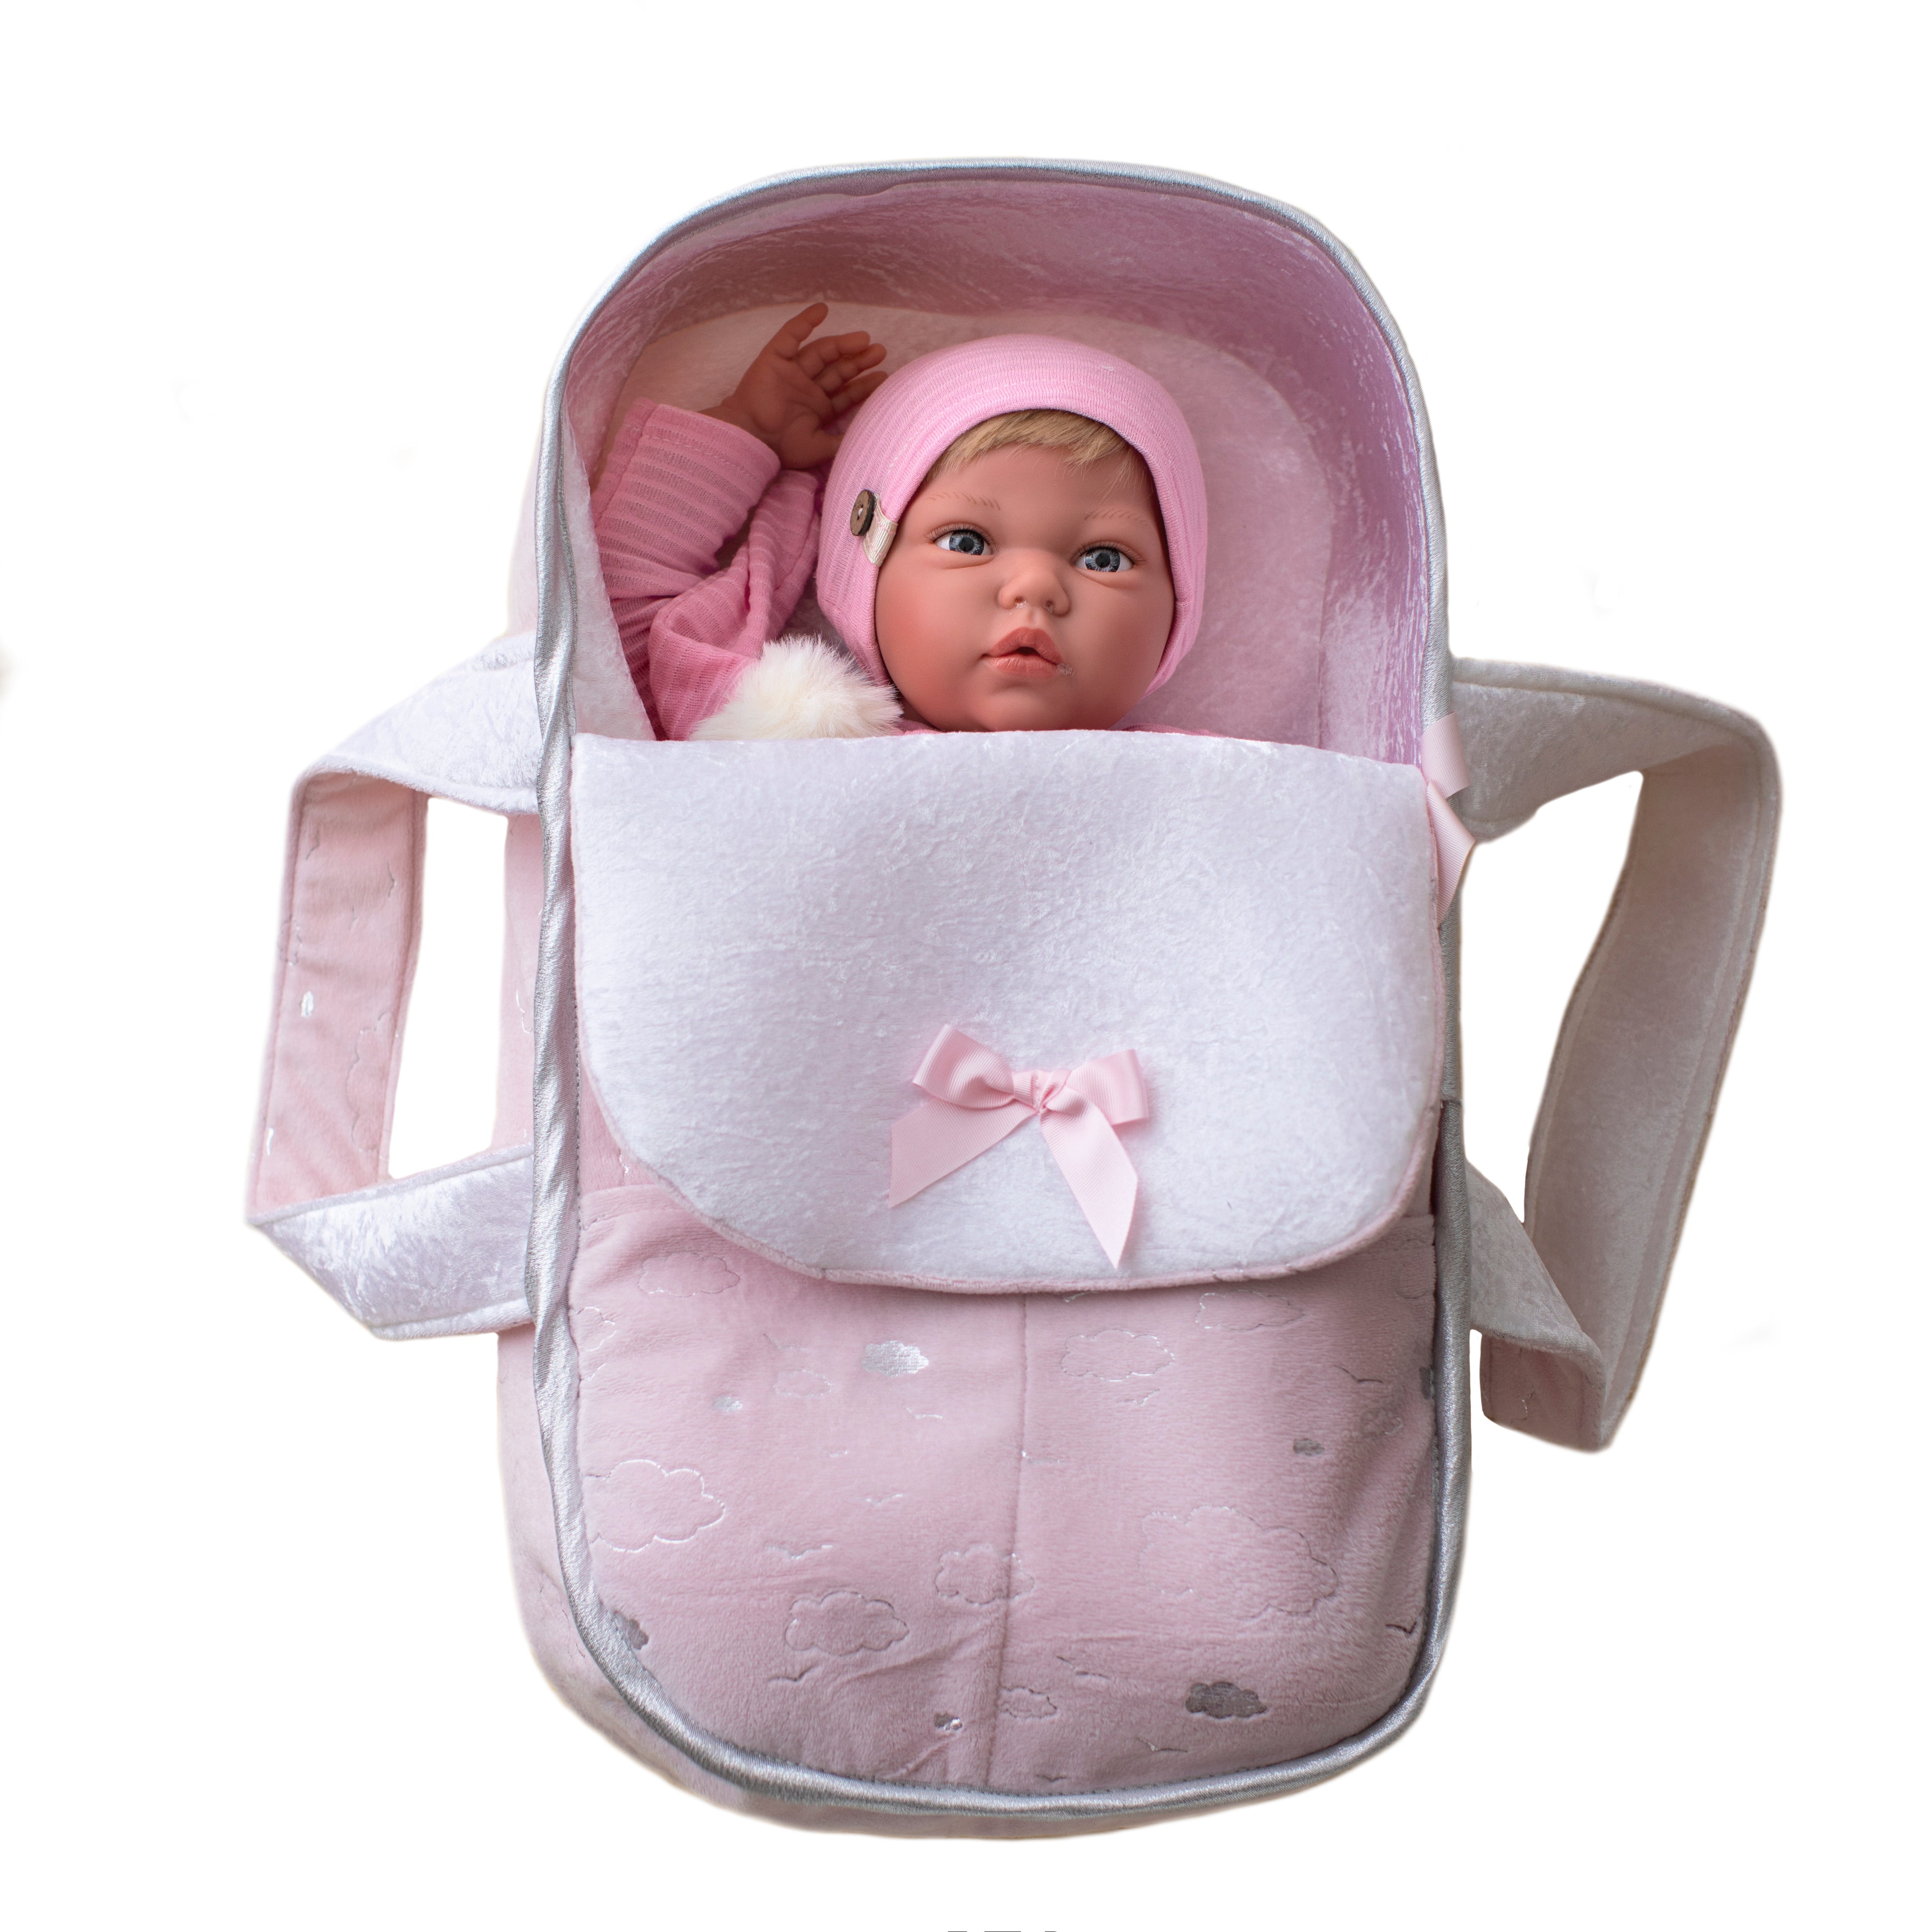 Baby Carrier + Cradle + Carrycot for Reborn Babies from 45 - 55CM